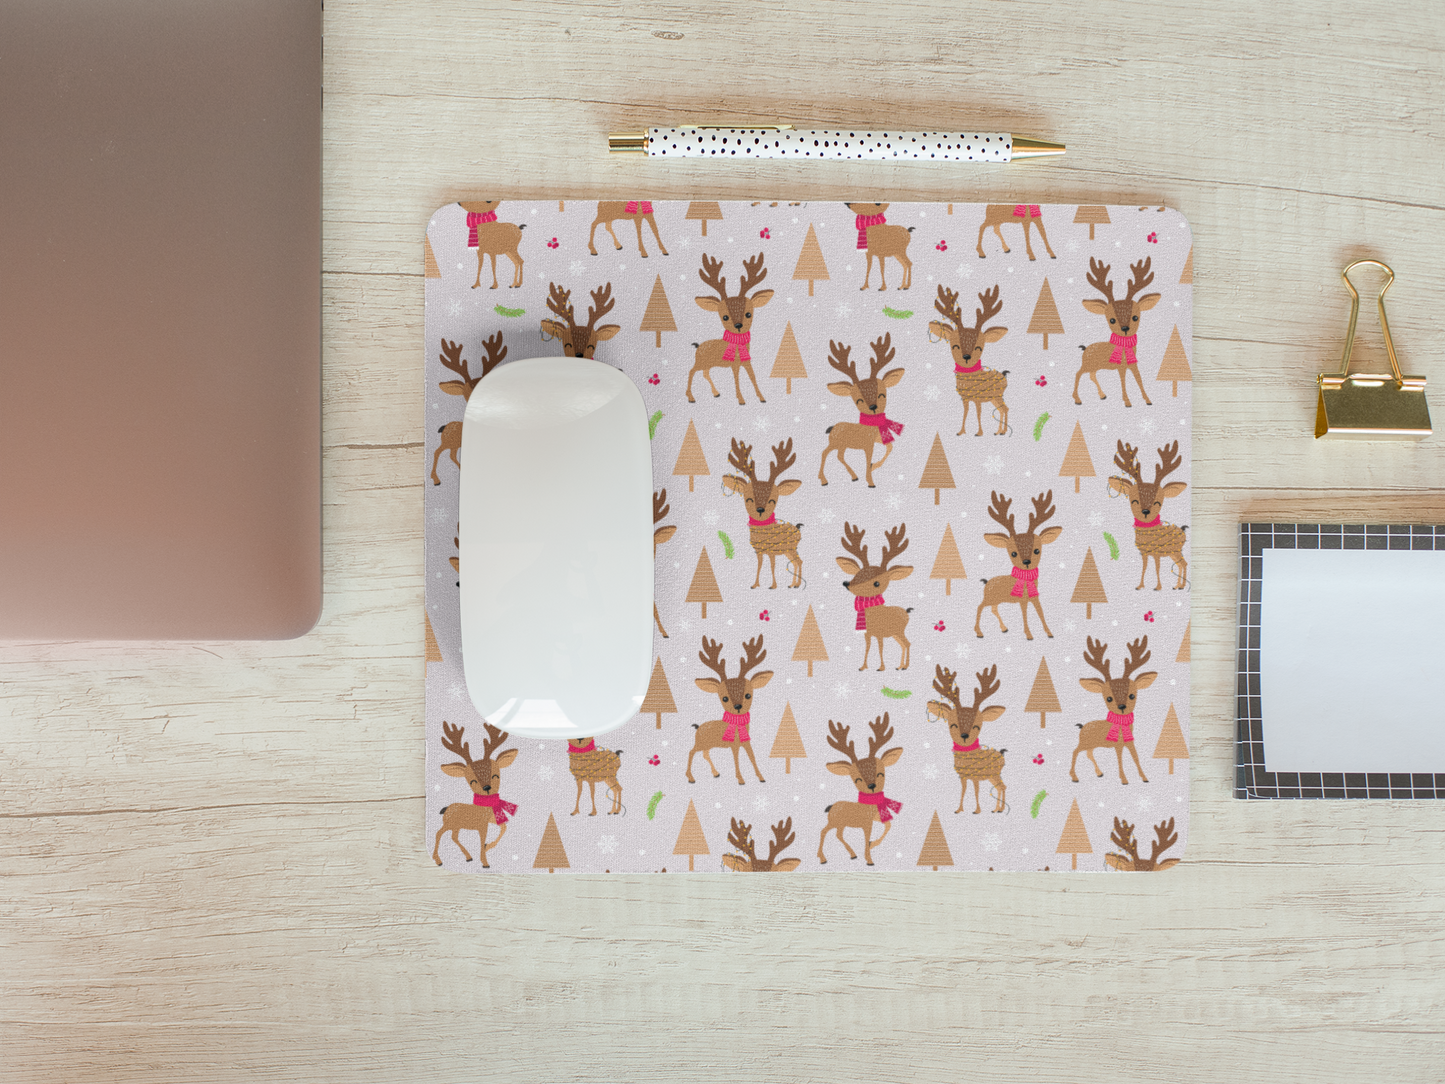 Christmas Reindeer Mousepad For Office | Gaming | School. Mousepad for Laptop and Desktop